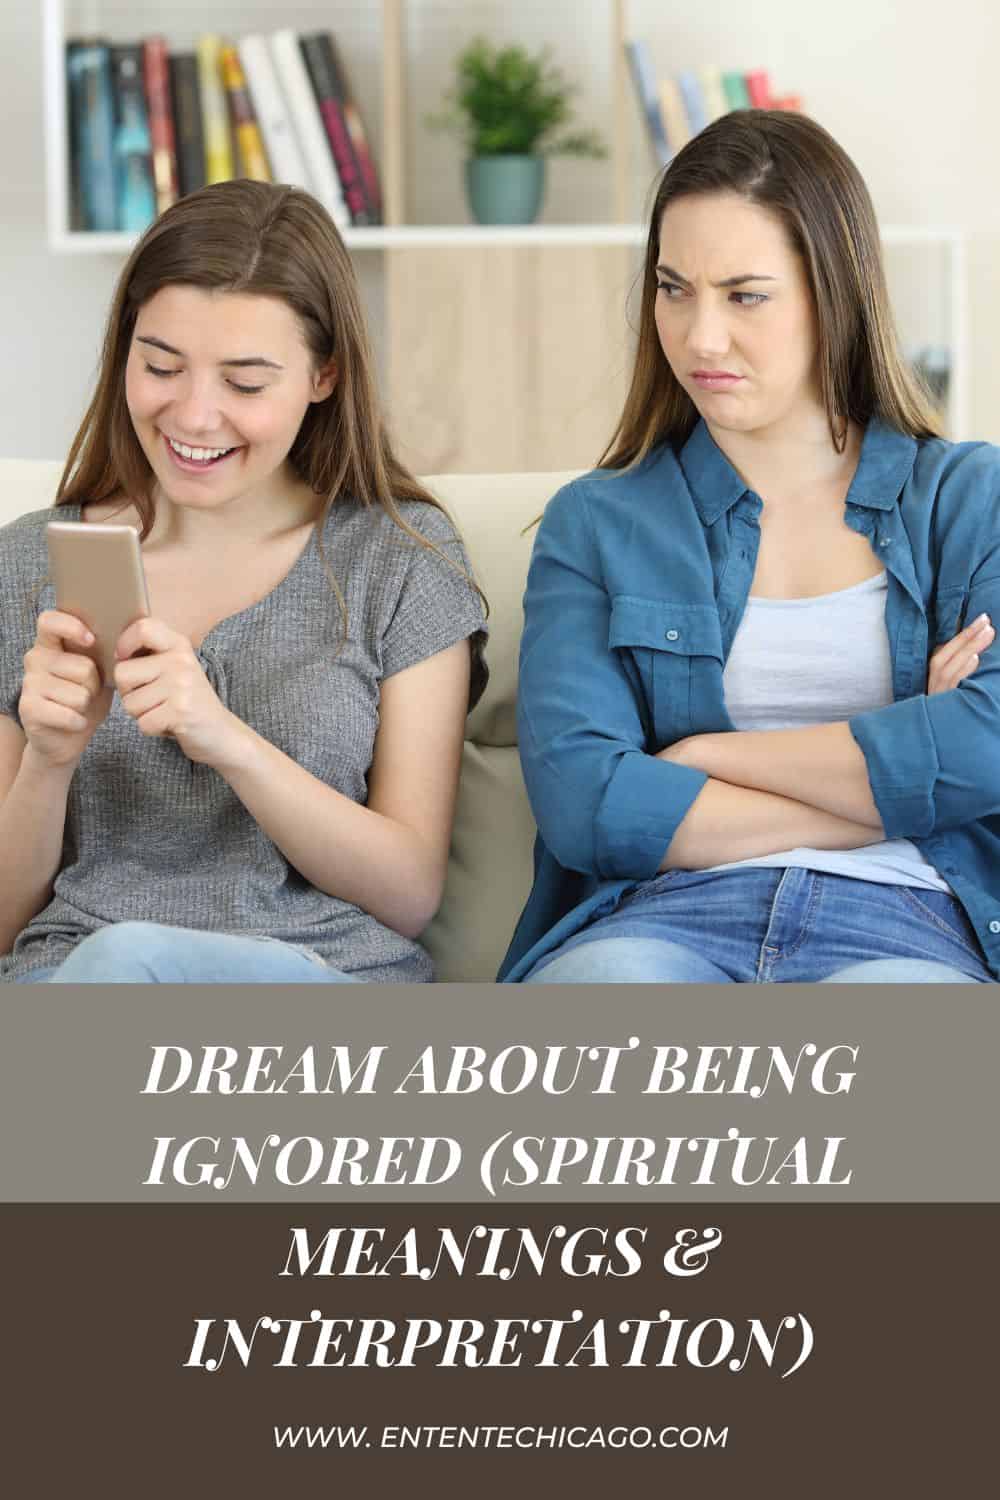 Dream About Being Ignored (Spiritual Meanings & Interpretation)